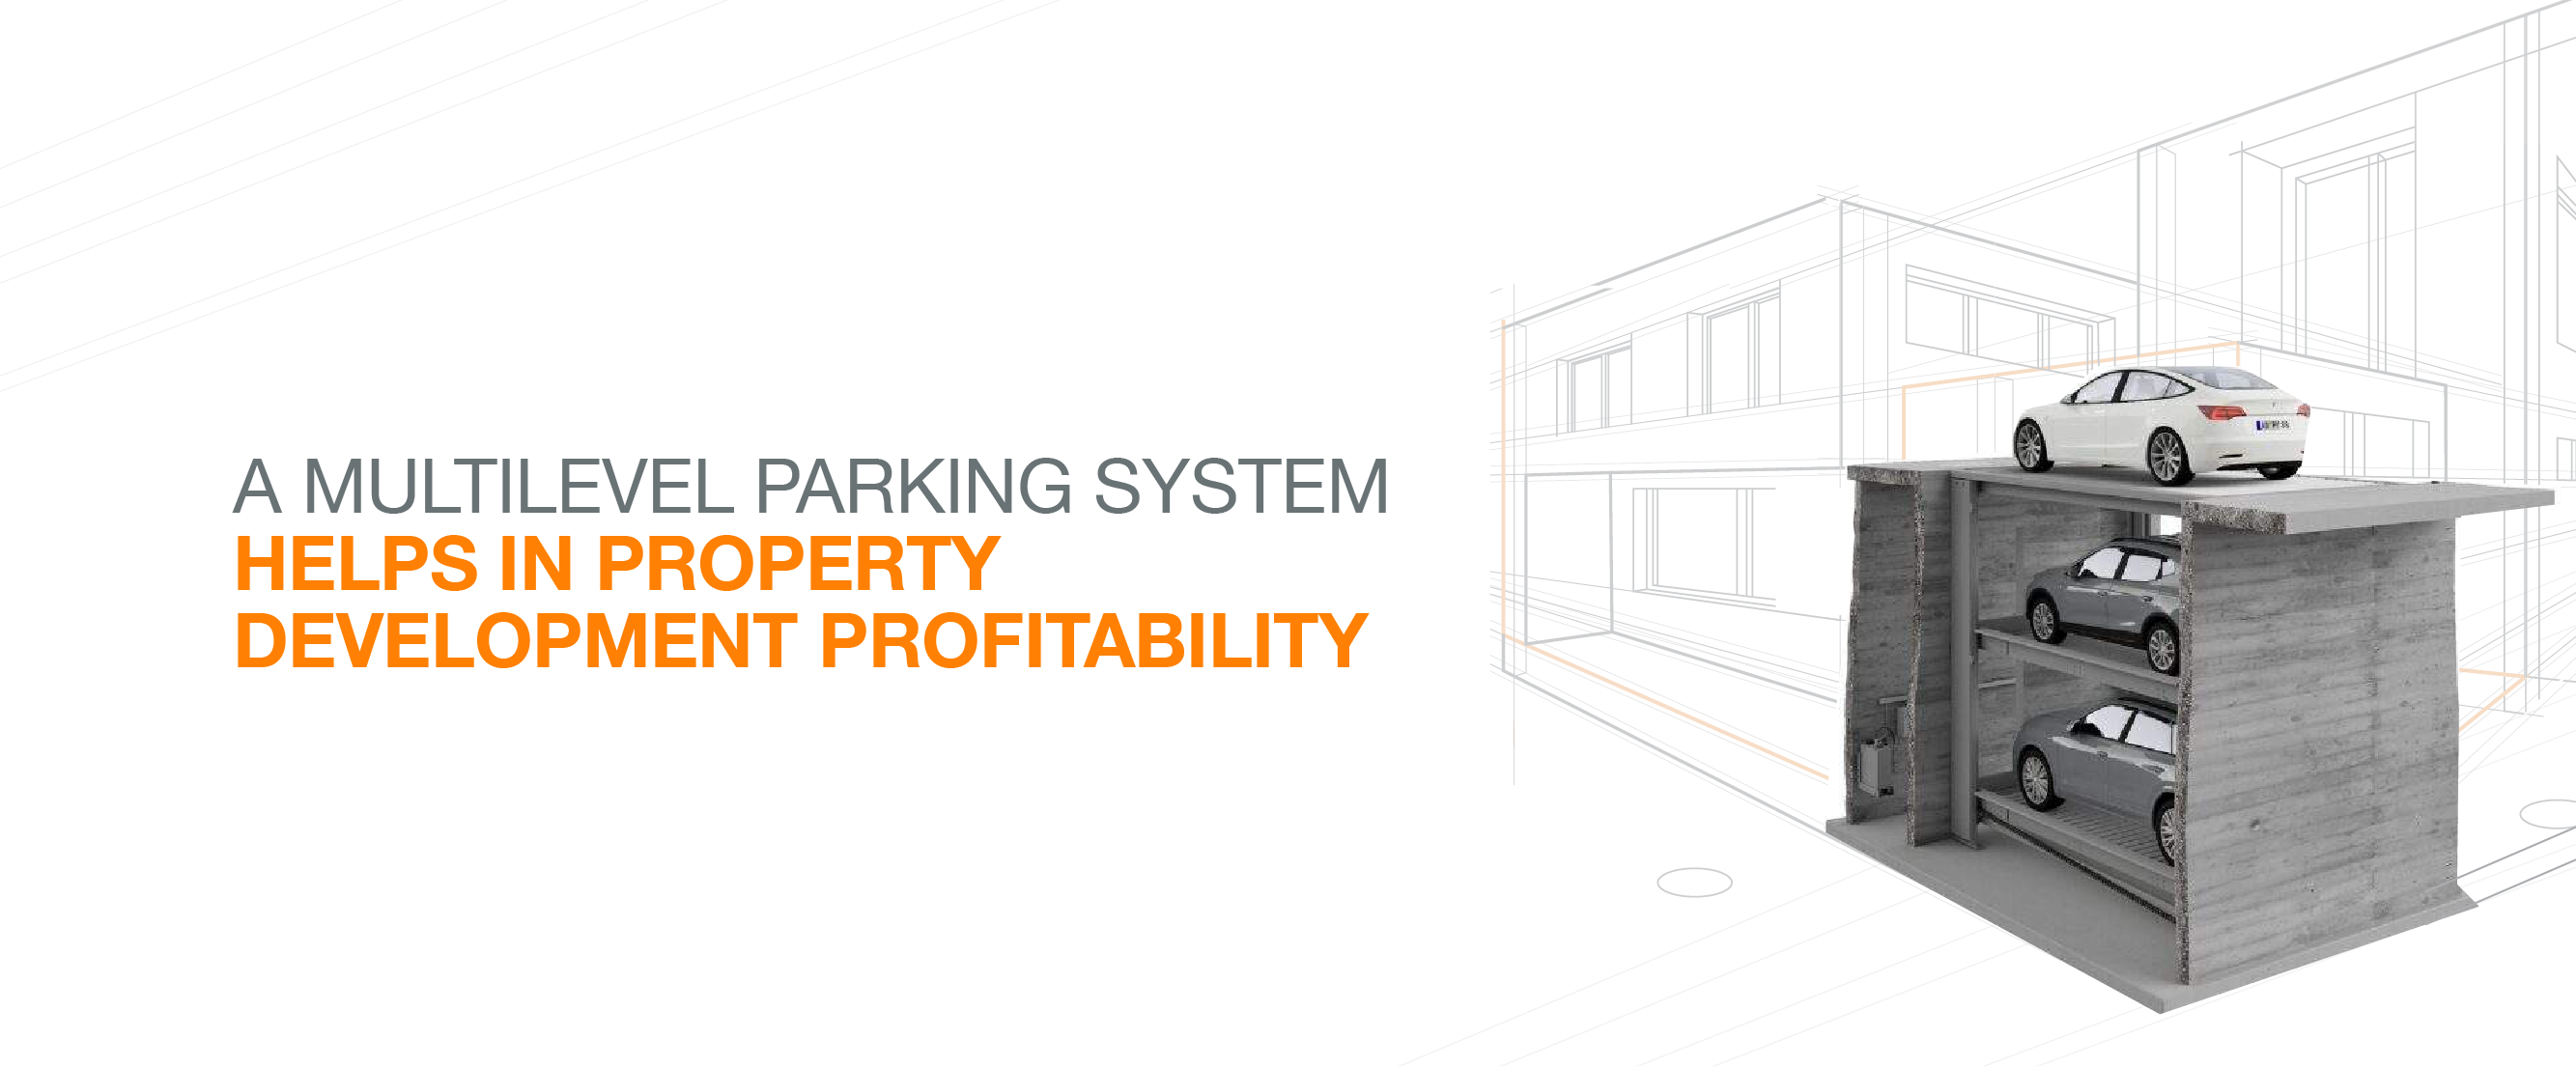 A Multilevel Parking System helps in Property Development Profitability